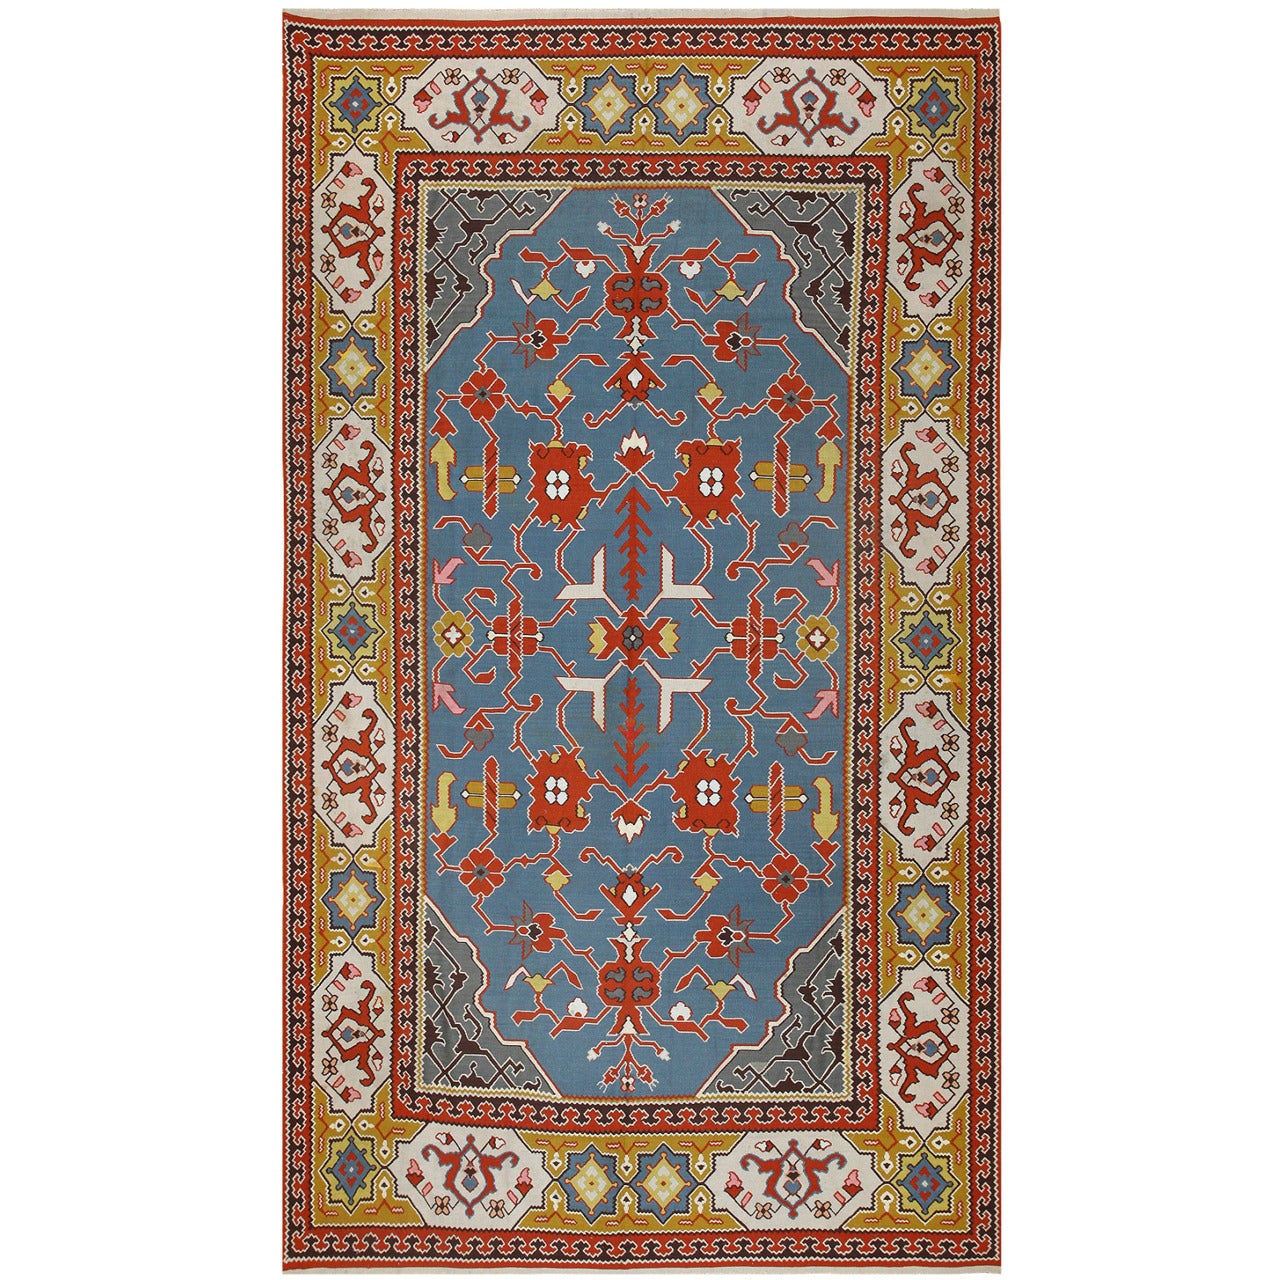 Nazmiyal Collection Vintage Turkish Kilim. Size: 6 ft 9 in x 11 ft 5 in 